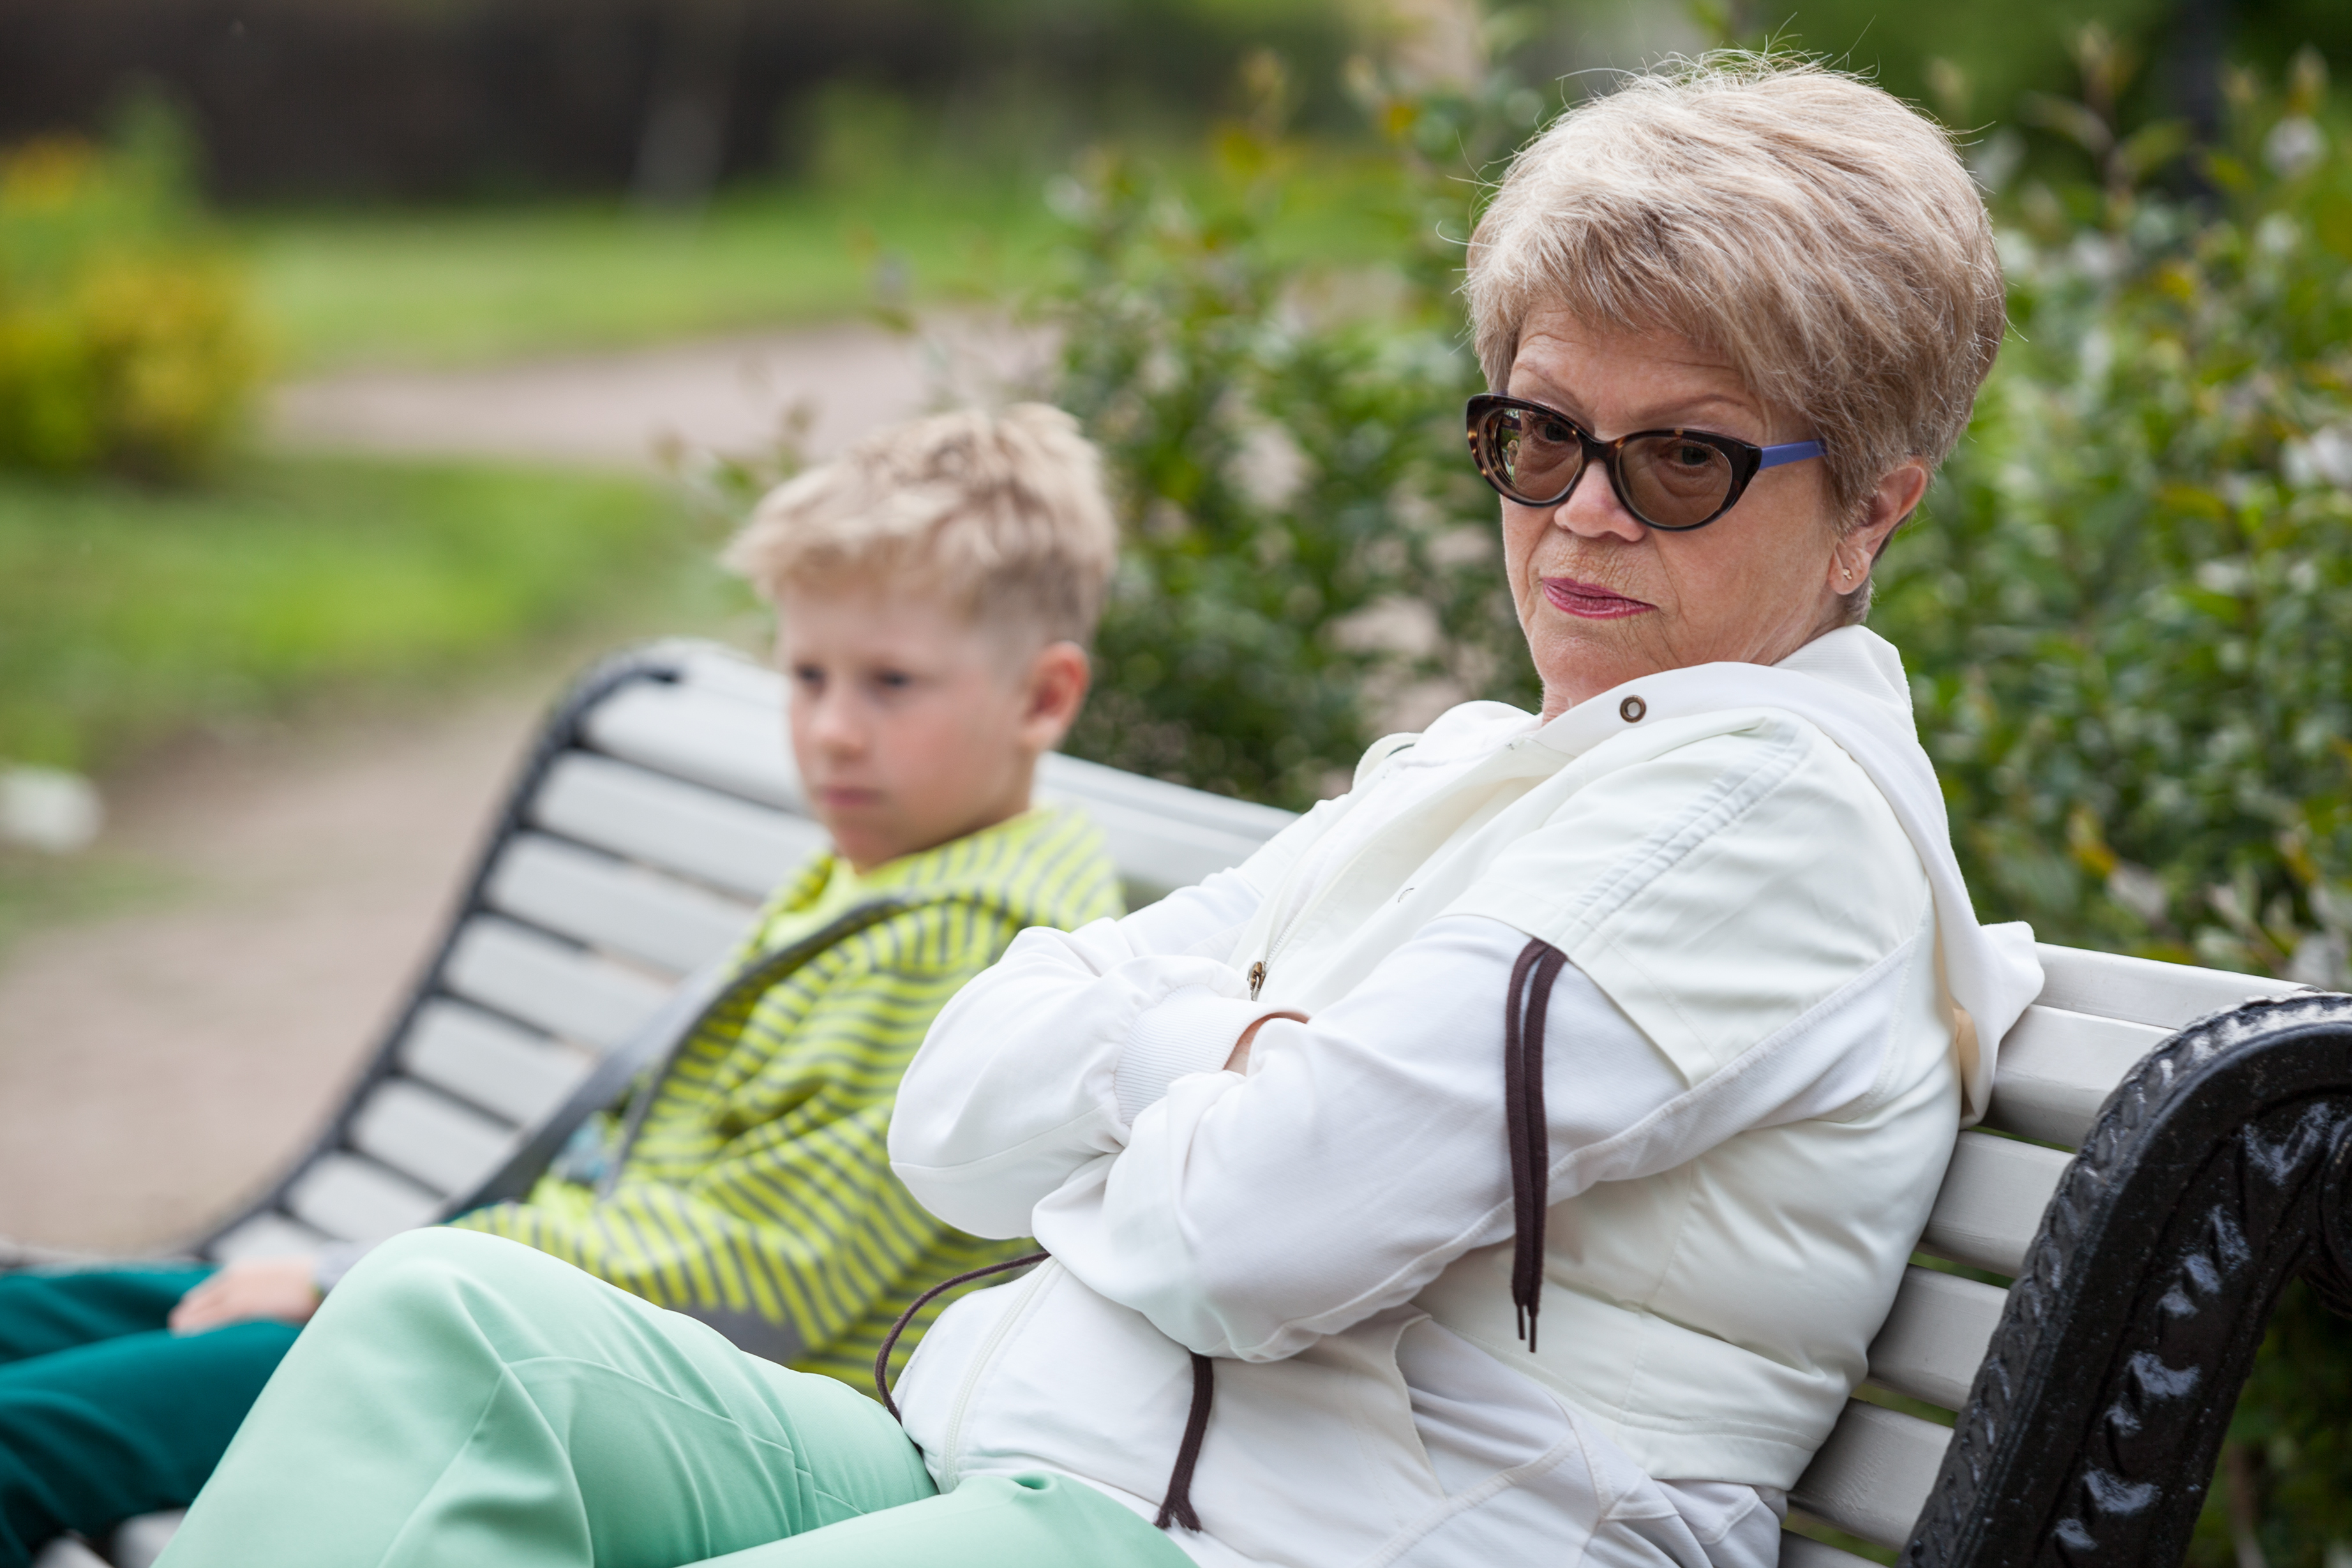 Older woman ignoring a young boy on a bench | Source: Shutterstock